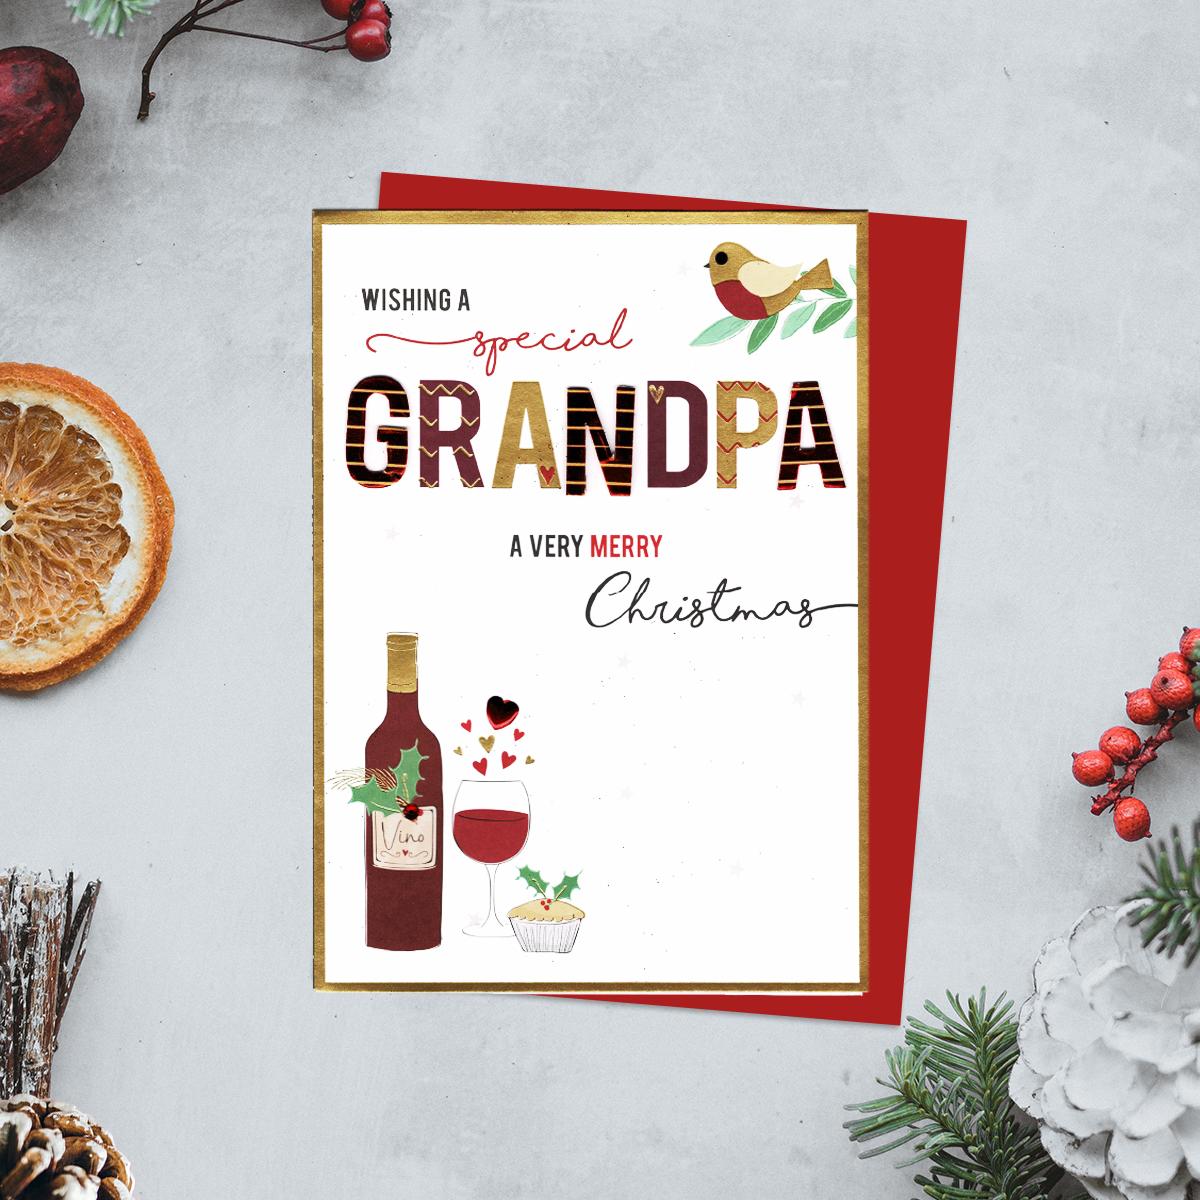 Wishing A Special Grandpa A Very Merry Christmas Featuring A Bottle Of Red Wine And Glass, Robin And Decoupage Lettering. Finished With Jewel Embellishments And Red Envelope